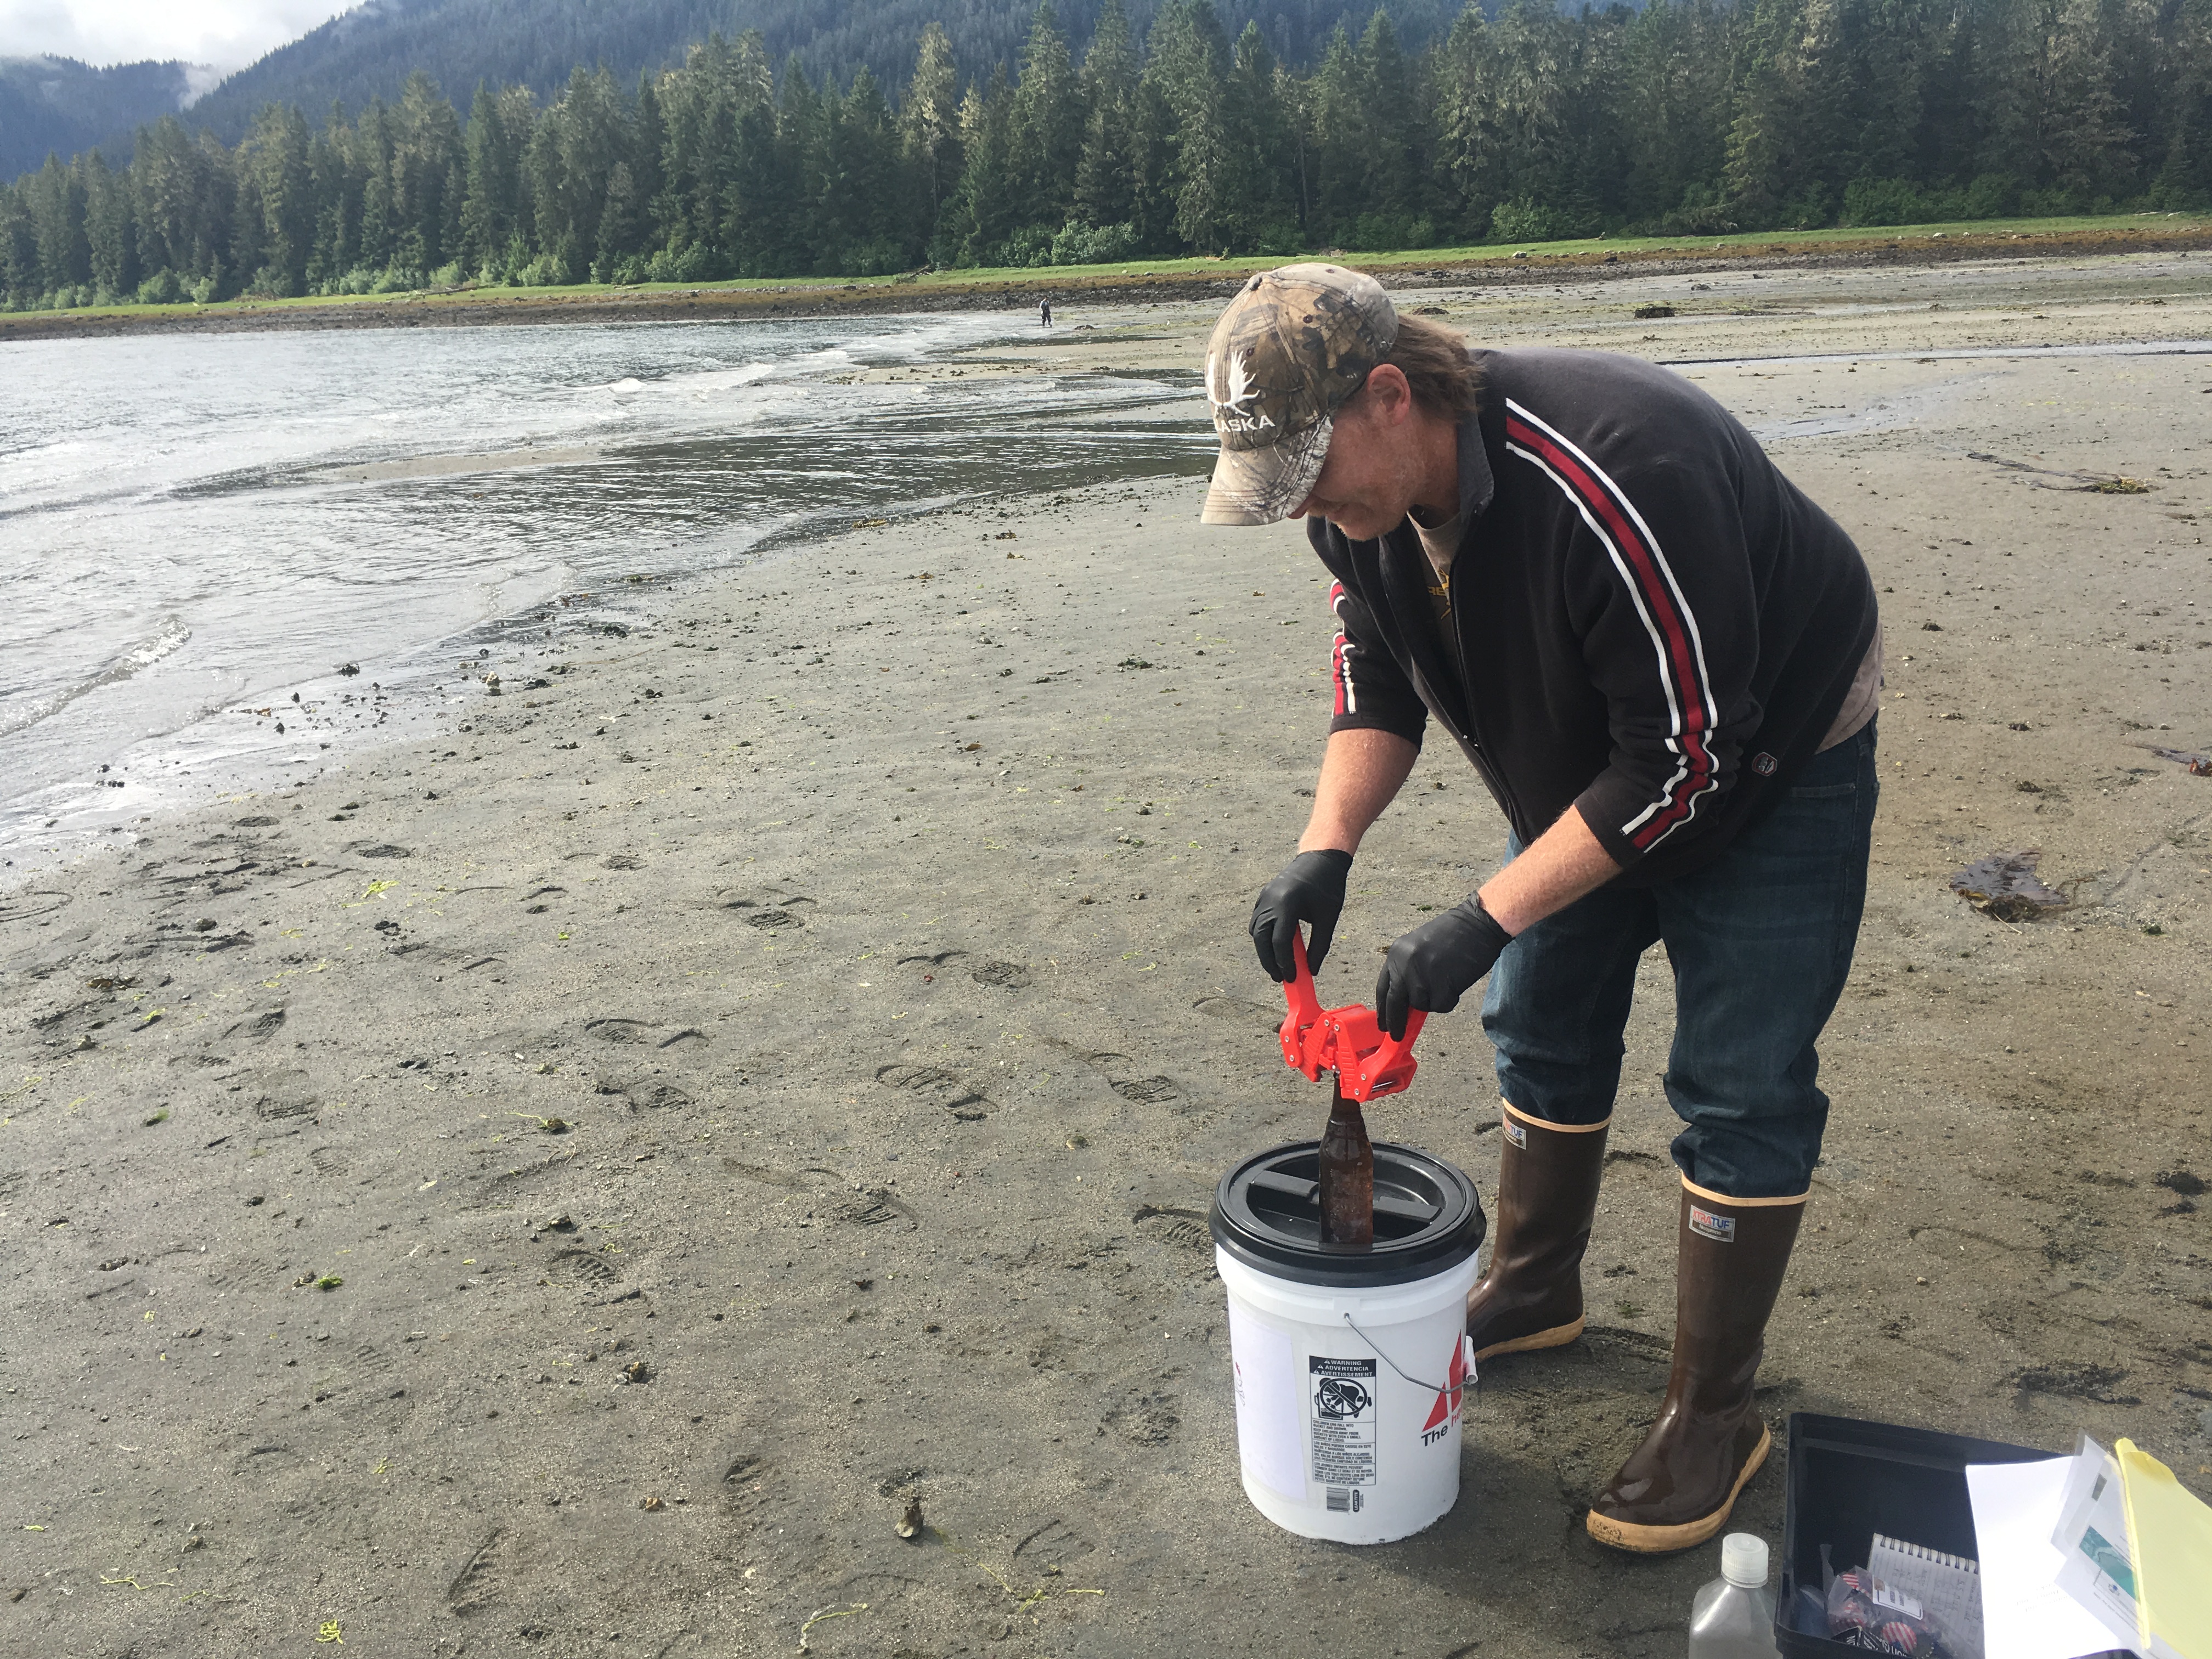 Petersburg Indian Association’s Brandon Thynes caps a bottle of ocean water at Sandy Beach. The sample is a part of Sitka Tribe’s efforts to study ocean acidification. (Photo by Alanna Elder/KFSK)